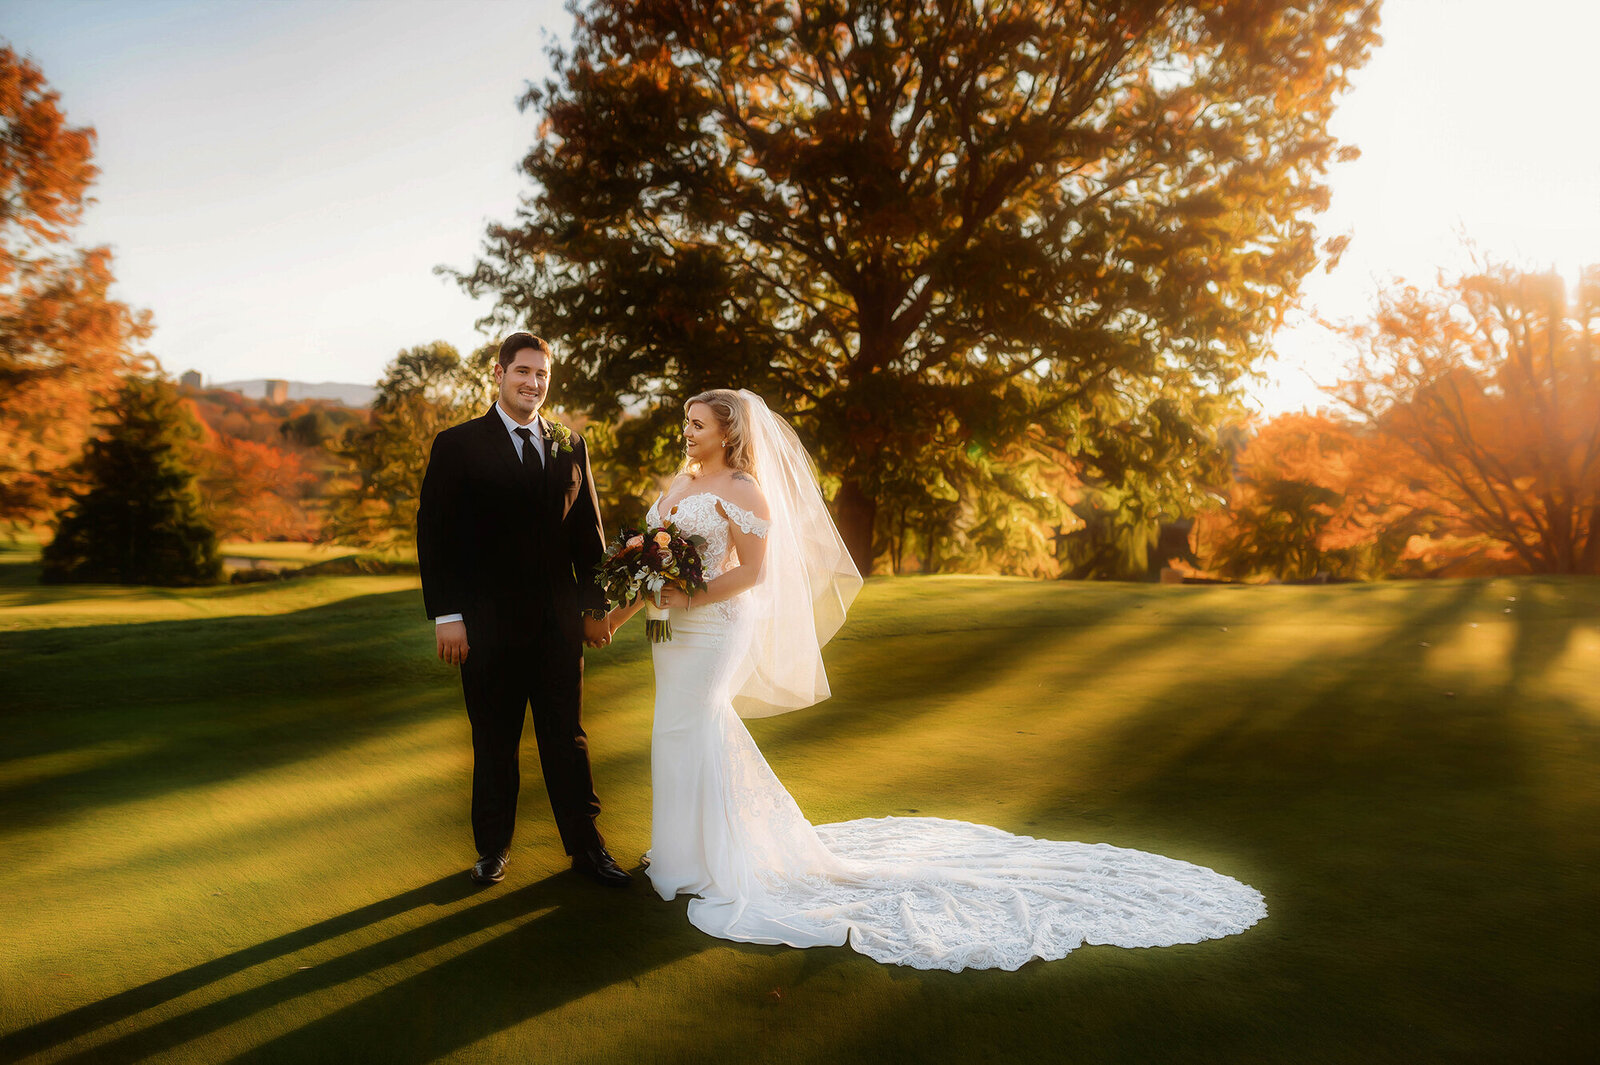 Bride and Groom pose for portraits after their Elopement Ceremony at Grove Park Inn in Asheville, NC.